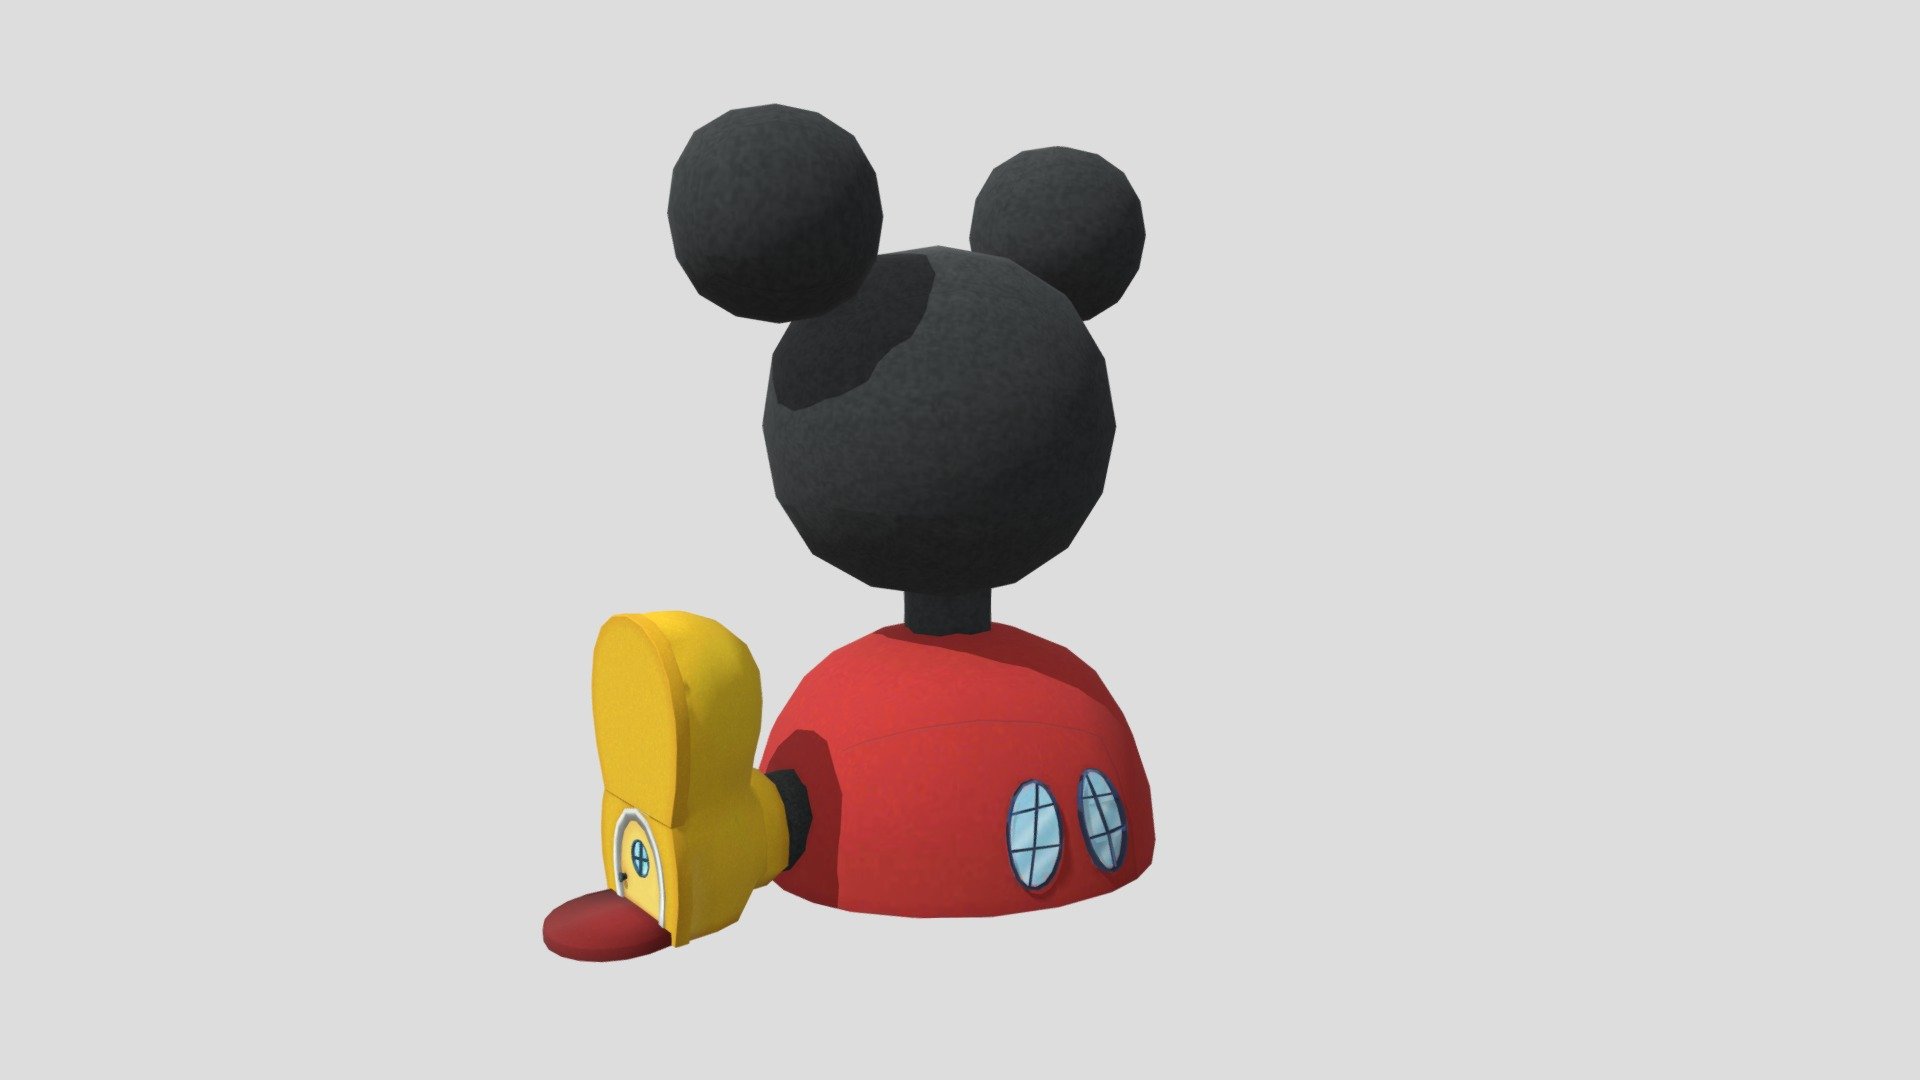 Mickey Mouse Clubhouse - Download Free 3D model by Redhomie (@redhomie)  [d9ad134]